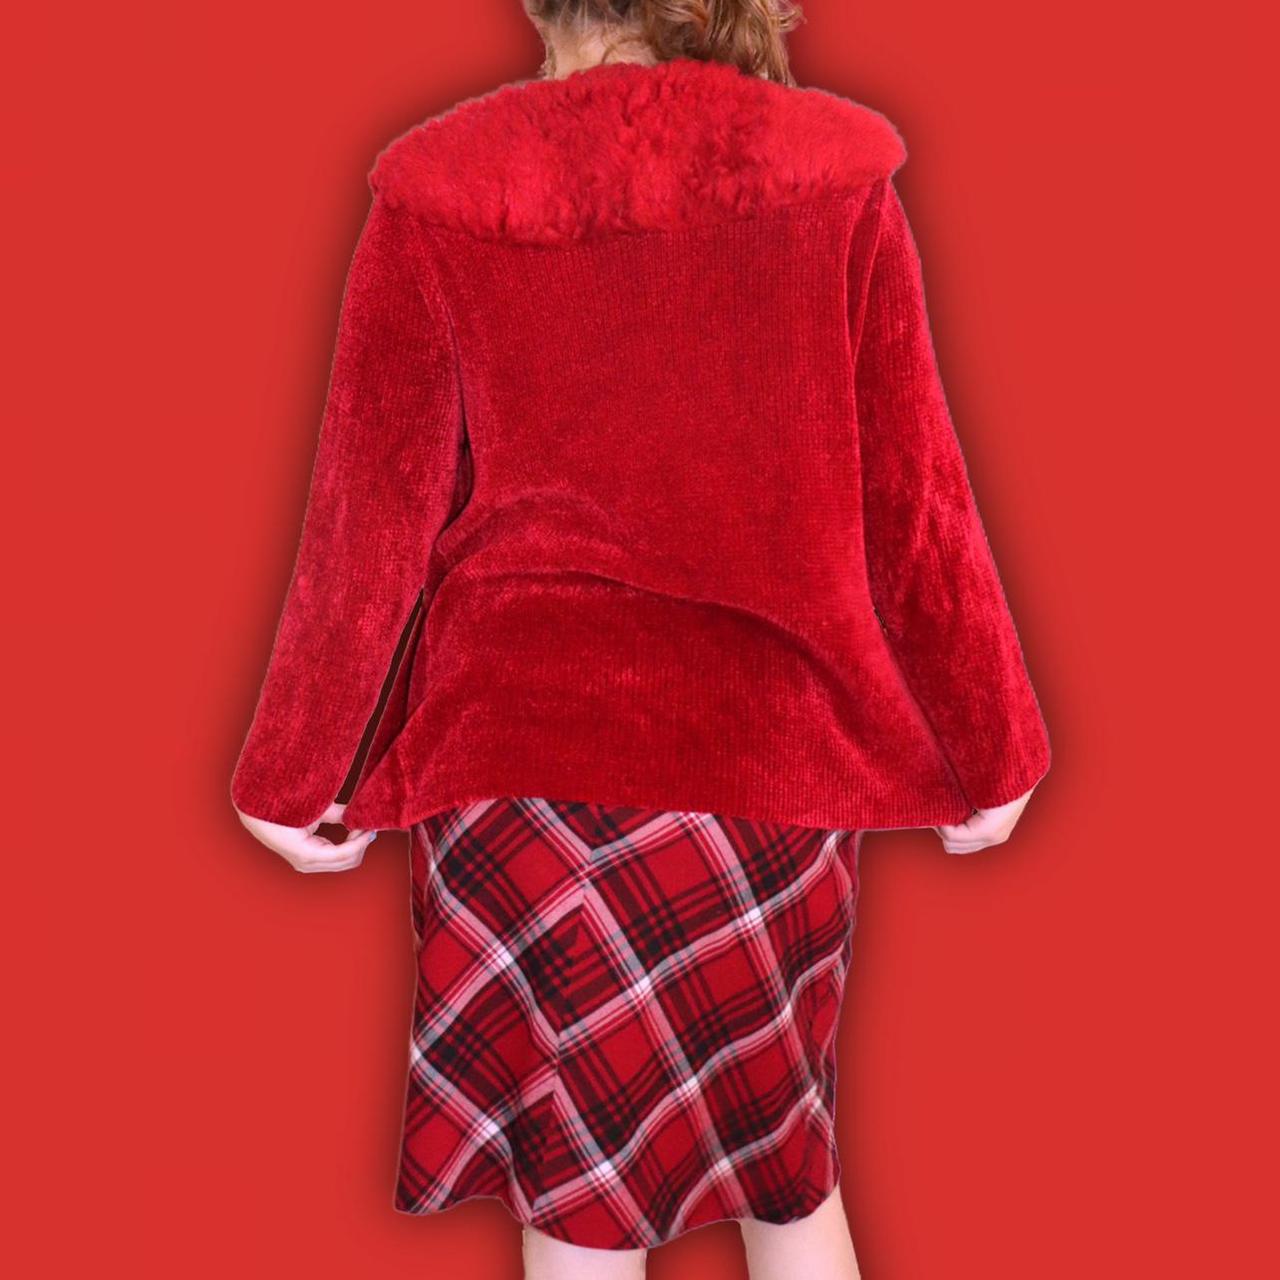 Product Image 3 - ❤️ RED FAUX FUR SWEATER